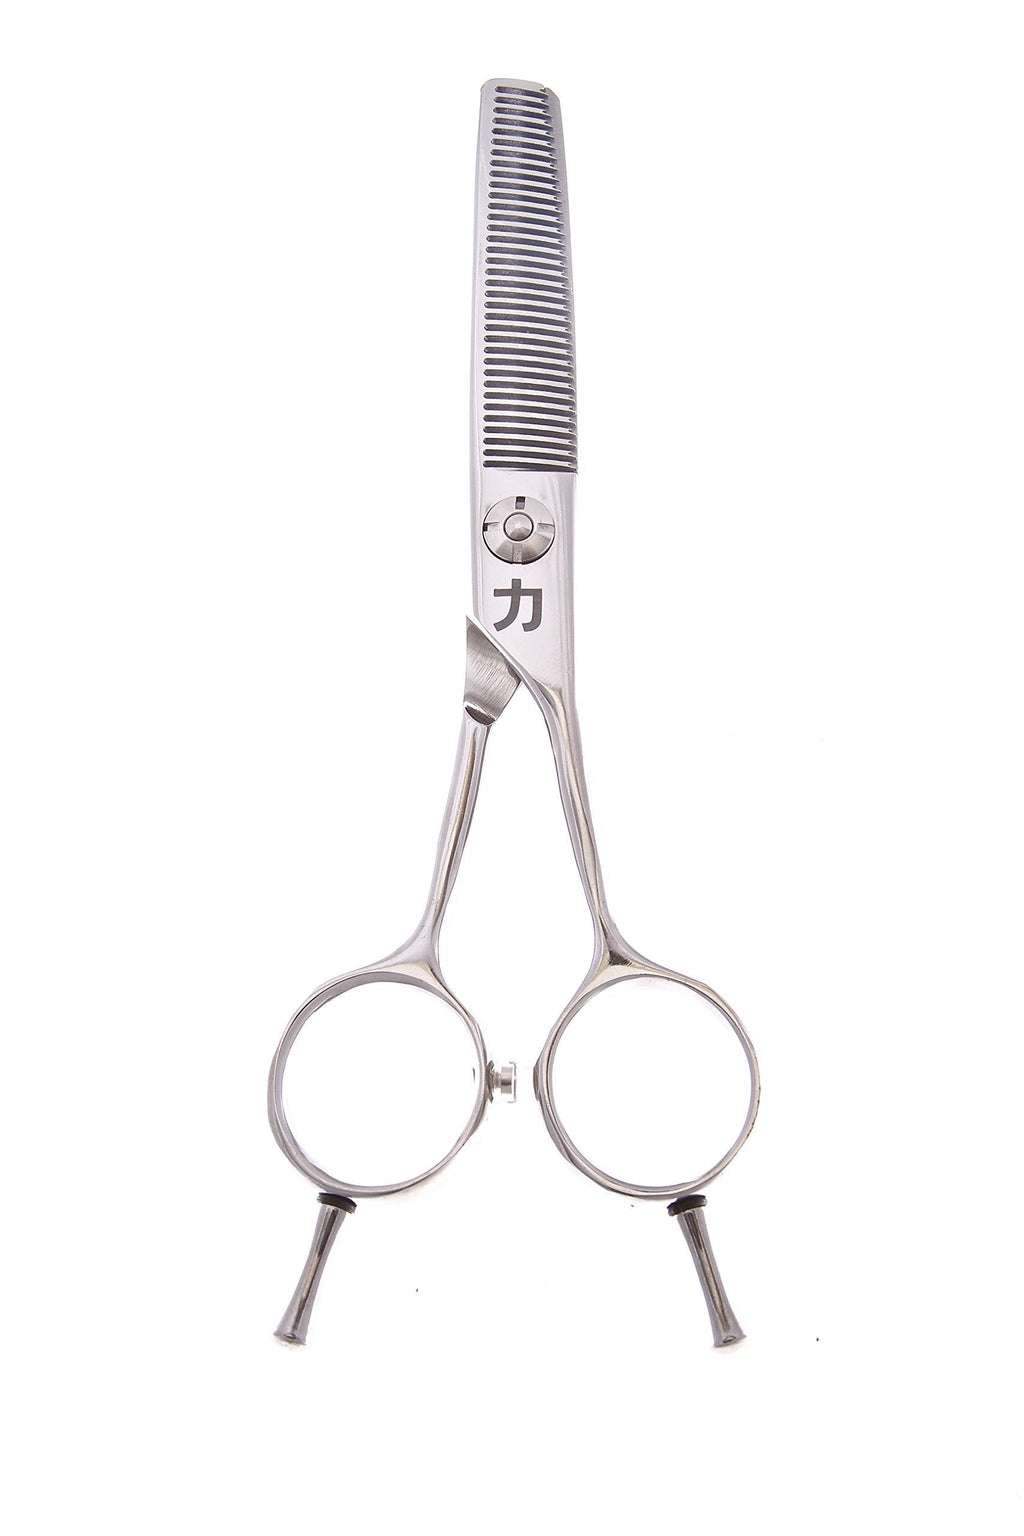 [Australia] - ShearsDirect Japanese 440C Stainless Steel Thinning Shear with 35 Teeth and Opposing Set Handles, 5.25" 